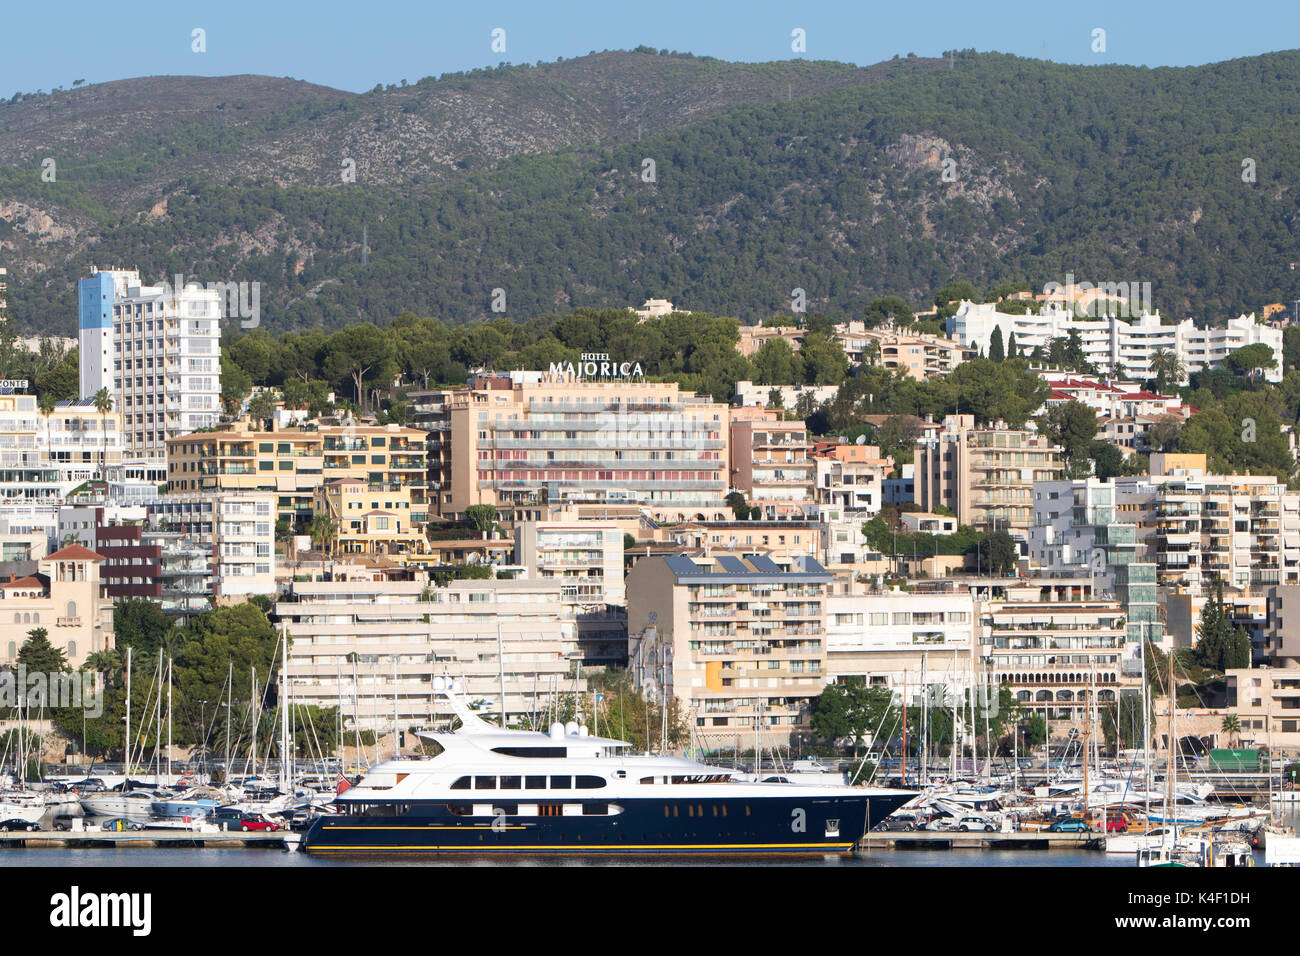 Hotel Majorca at The Bay of Palma de Mallorca in the Balearic Islands in Spain on the south coast of Majorca in summer Stock Photo